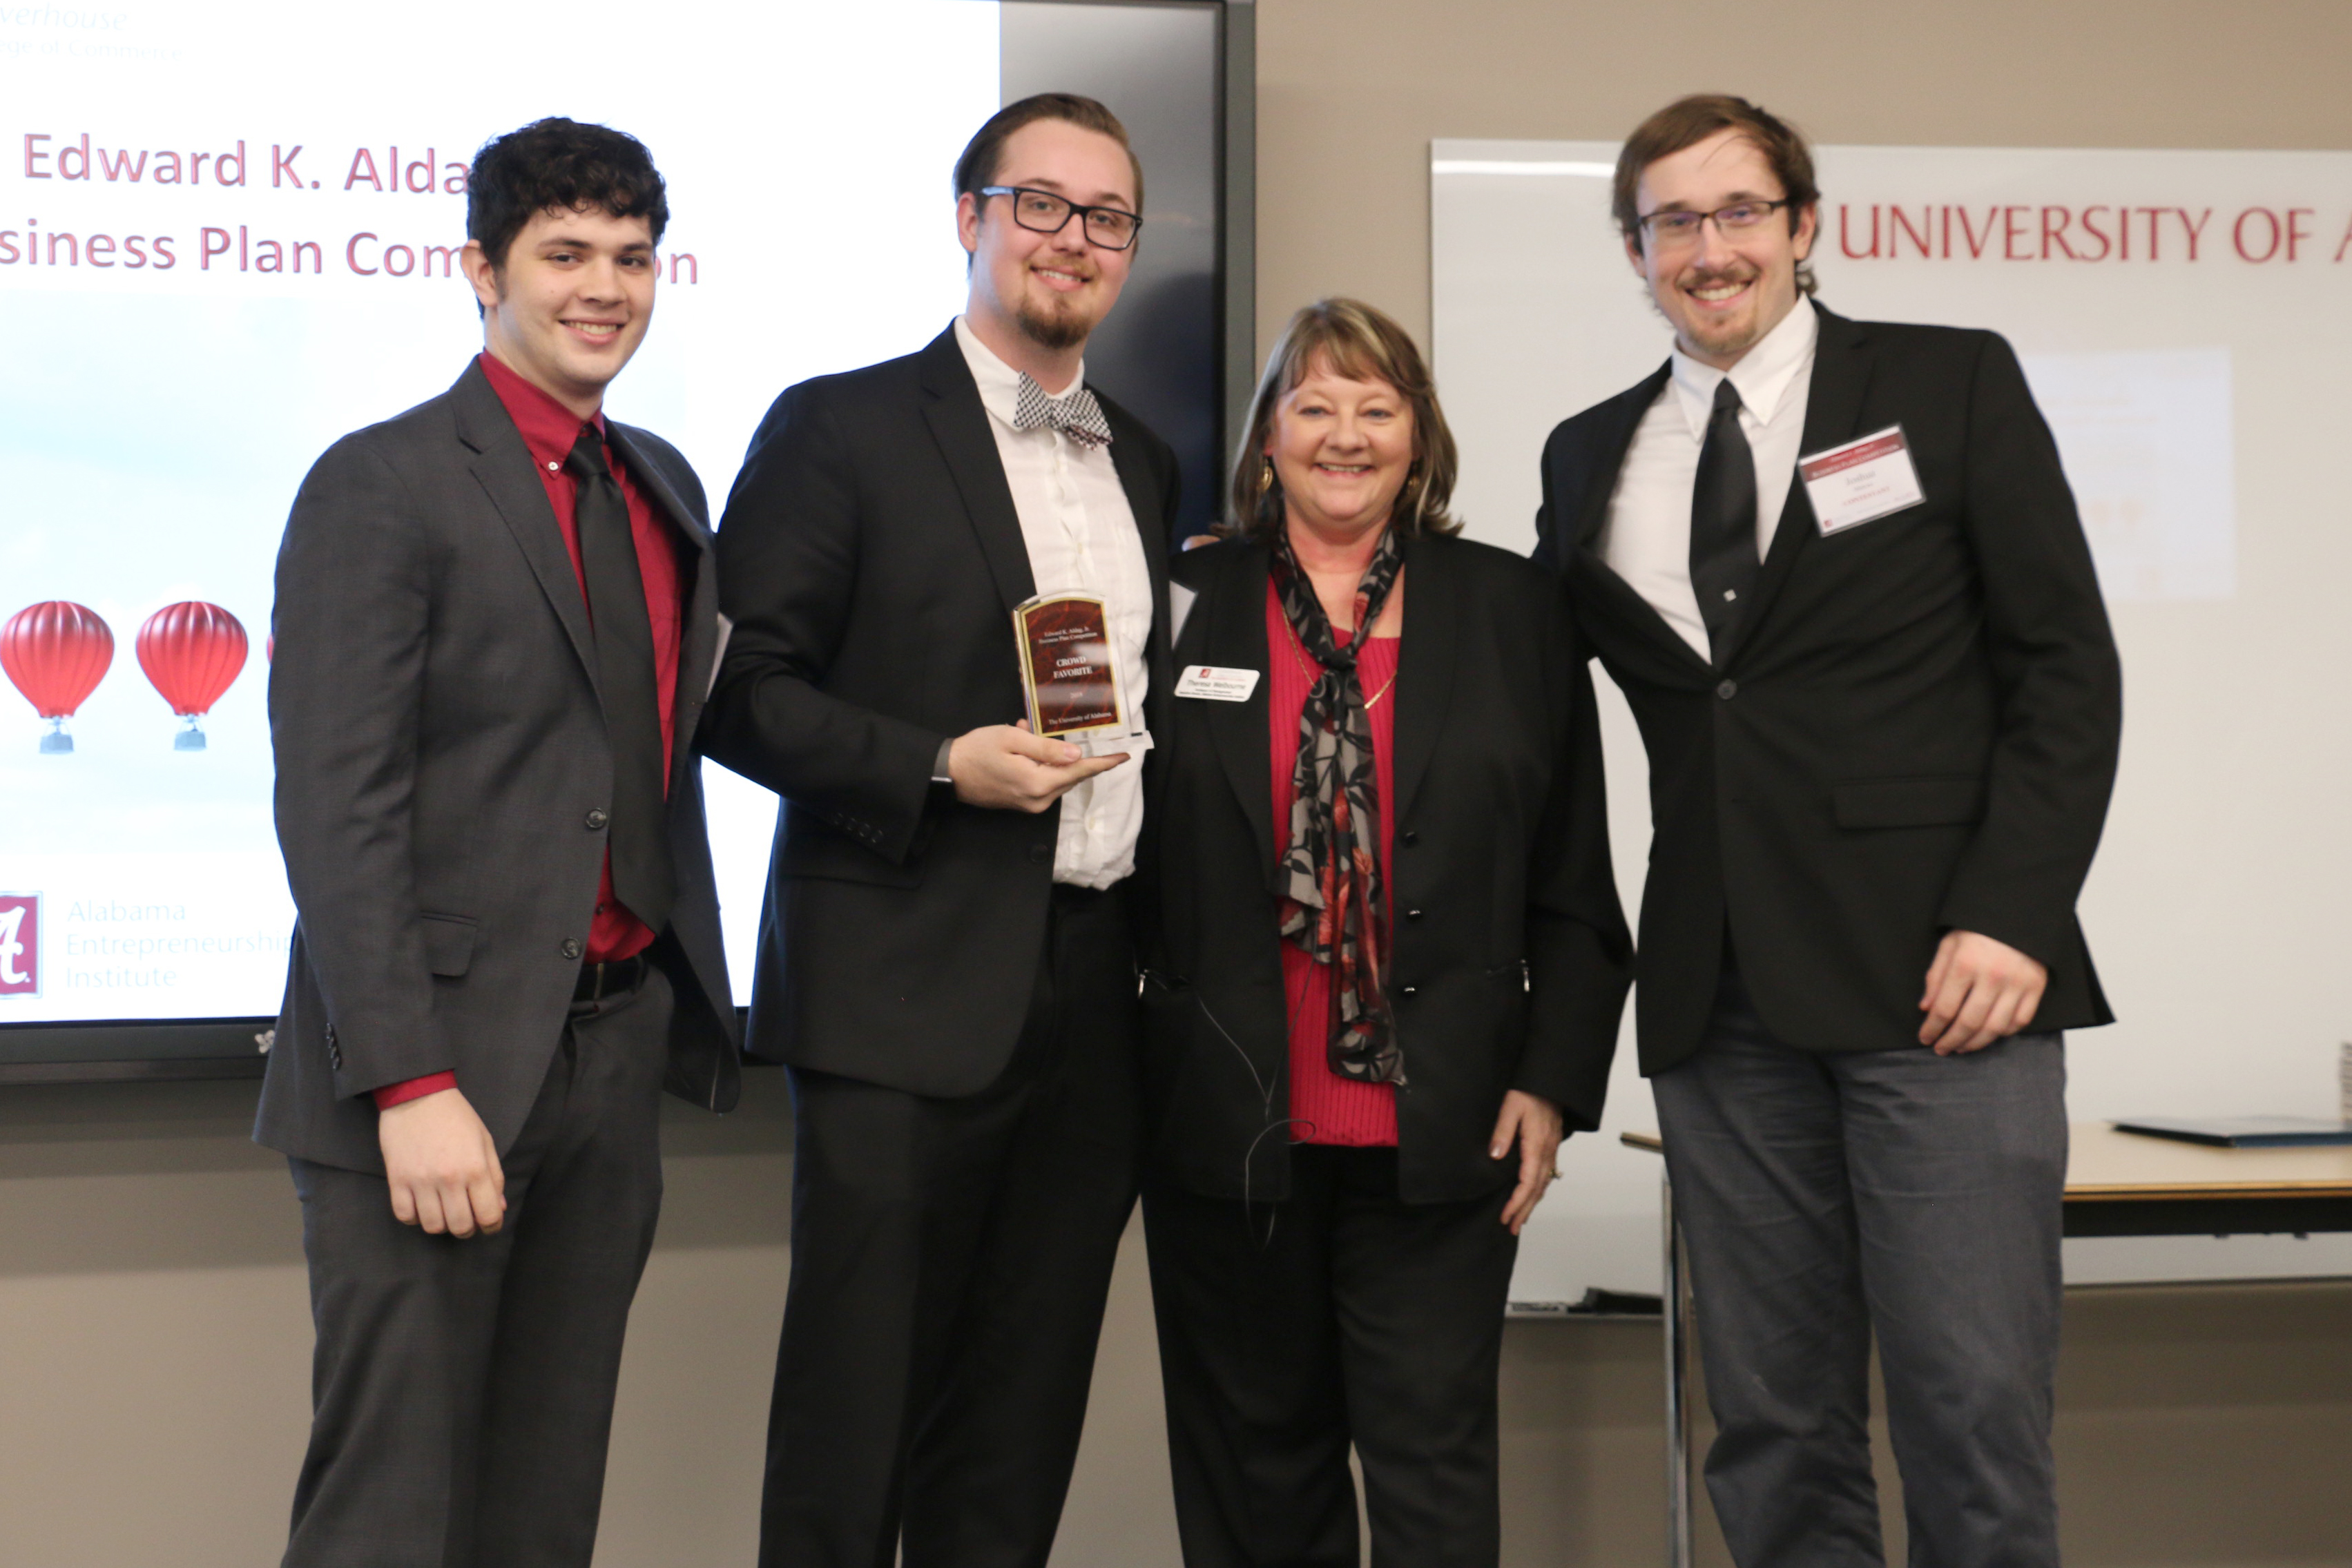 UA Students Win Grand Prize in 2018 Aldag Business Plan Competition